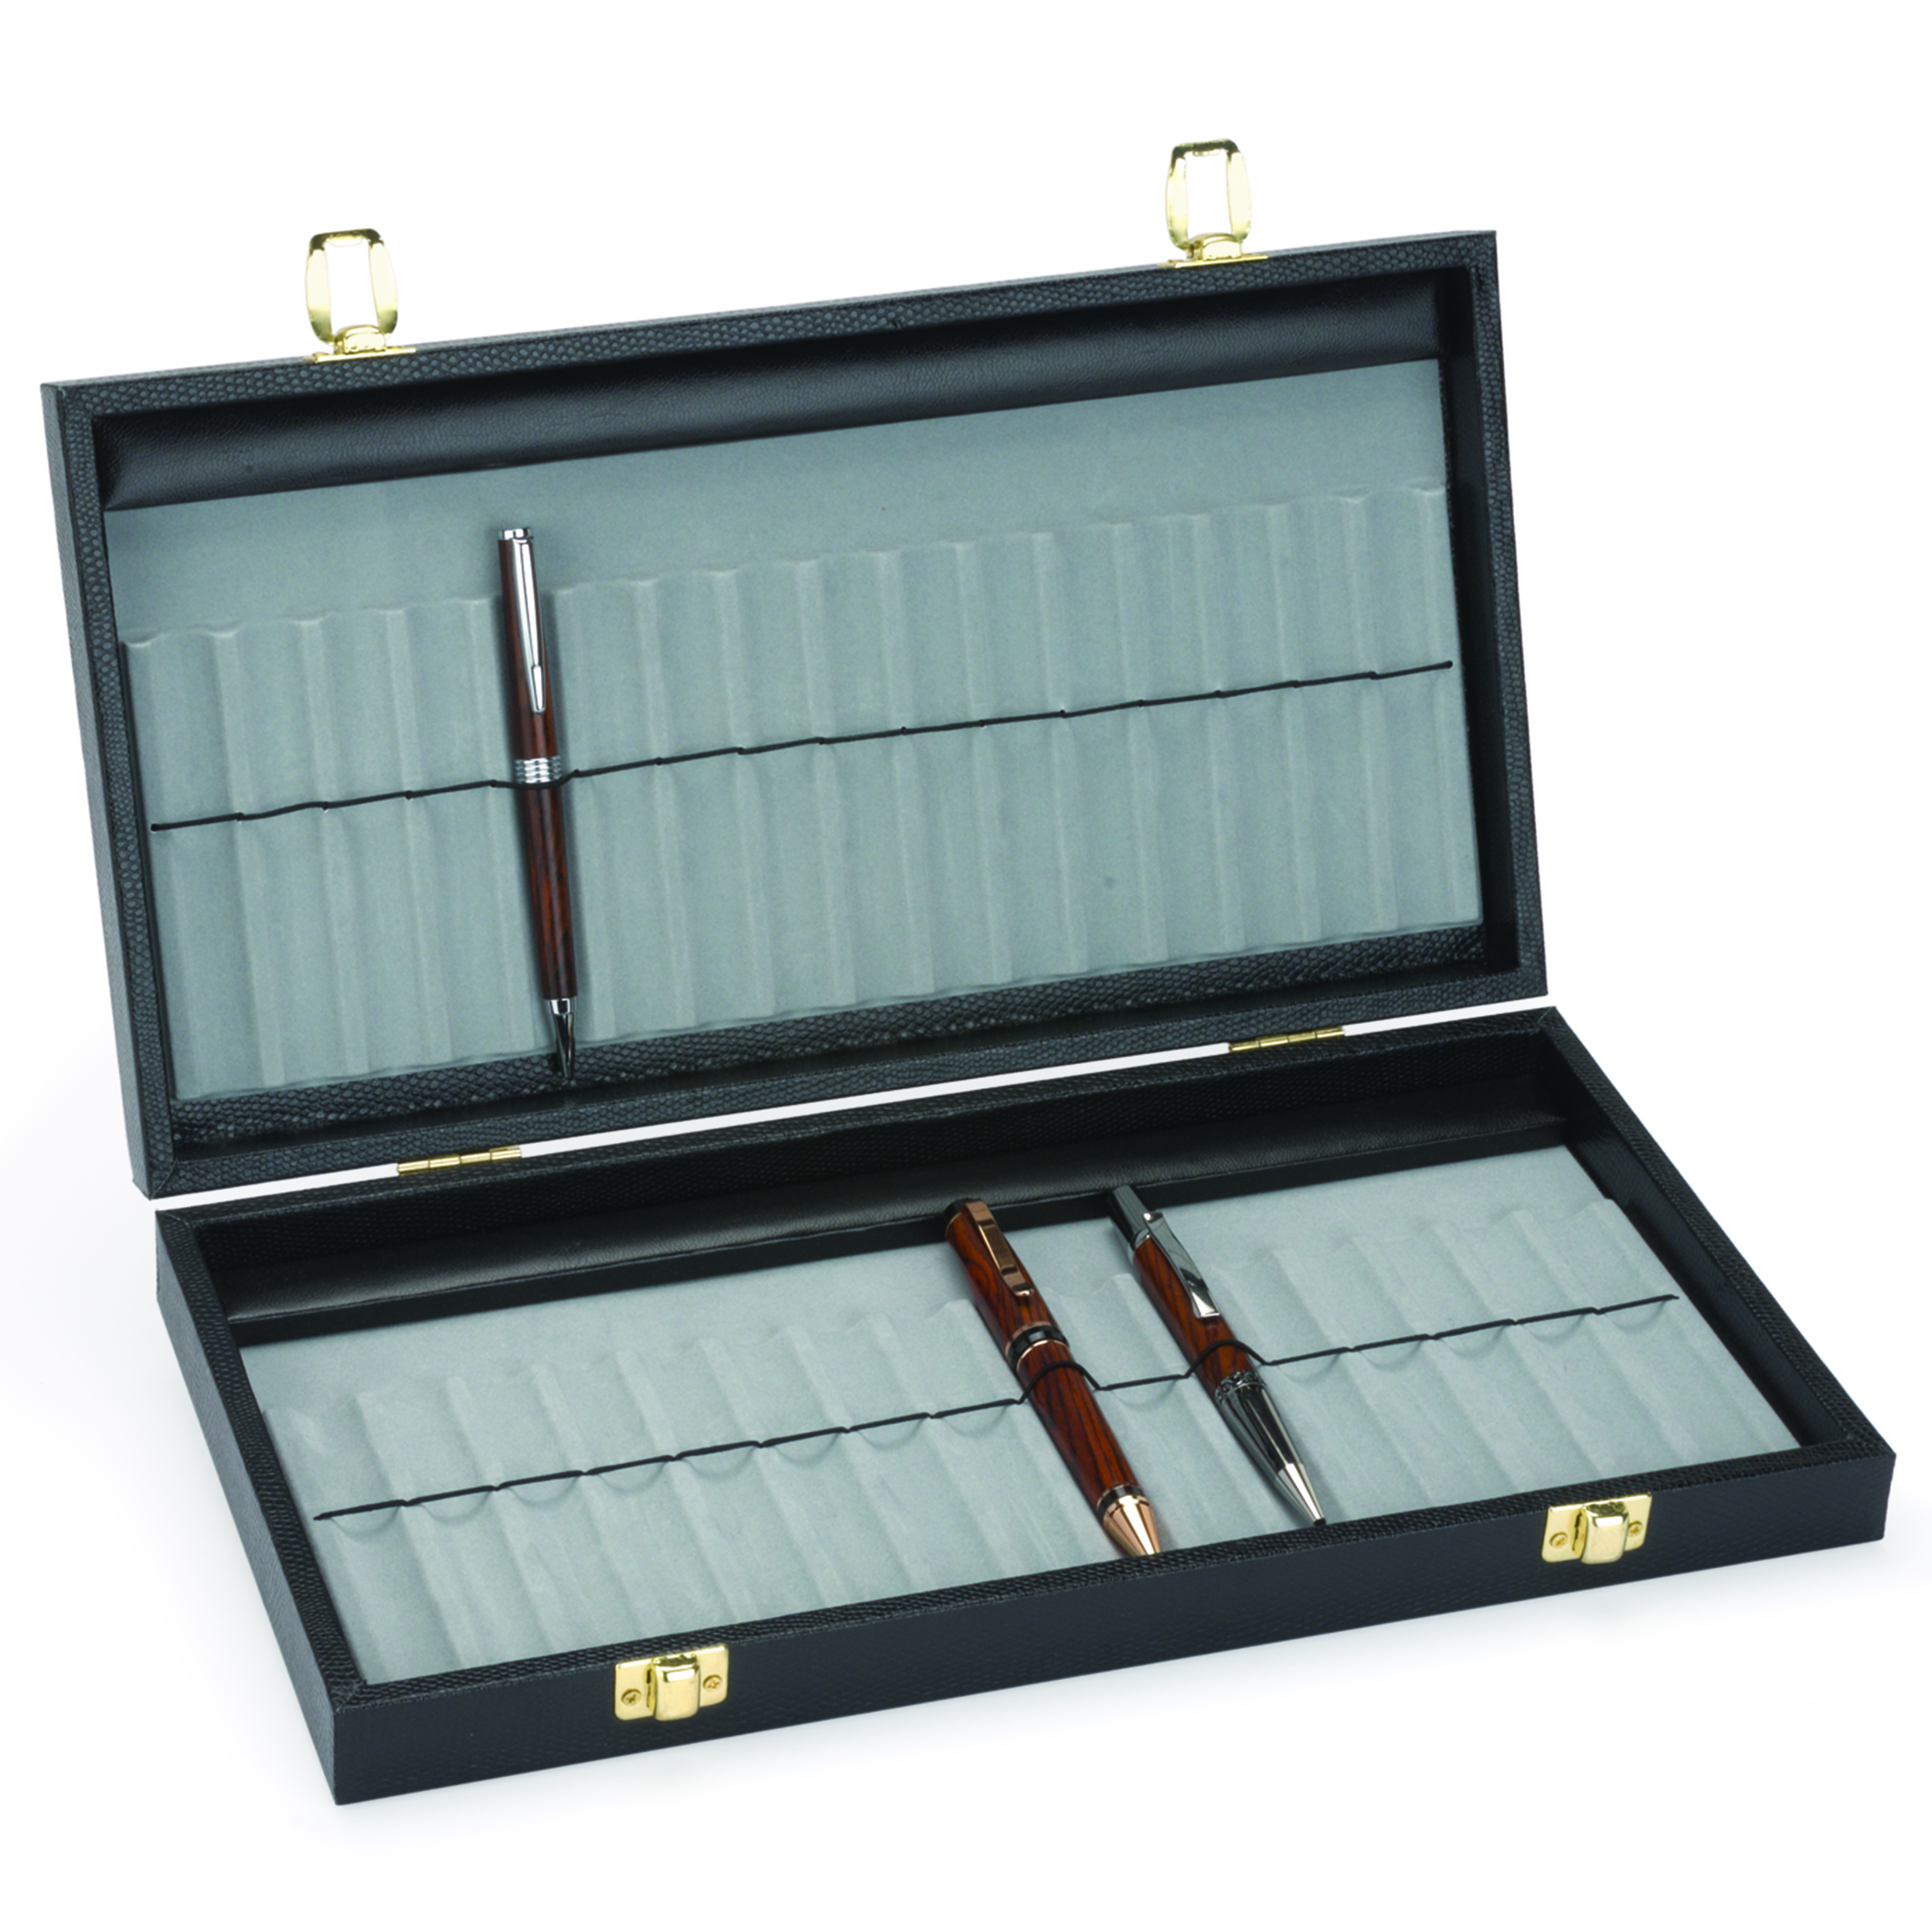 32 Pen Display Case With Lid